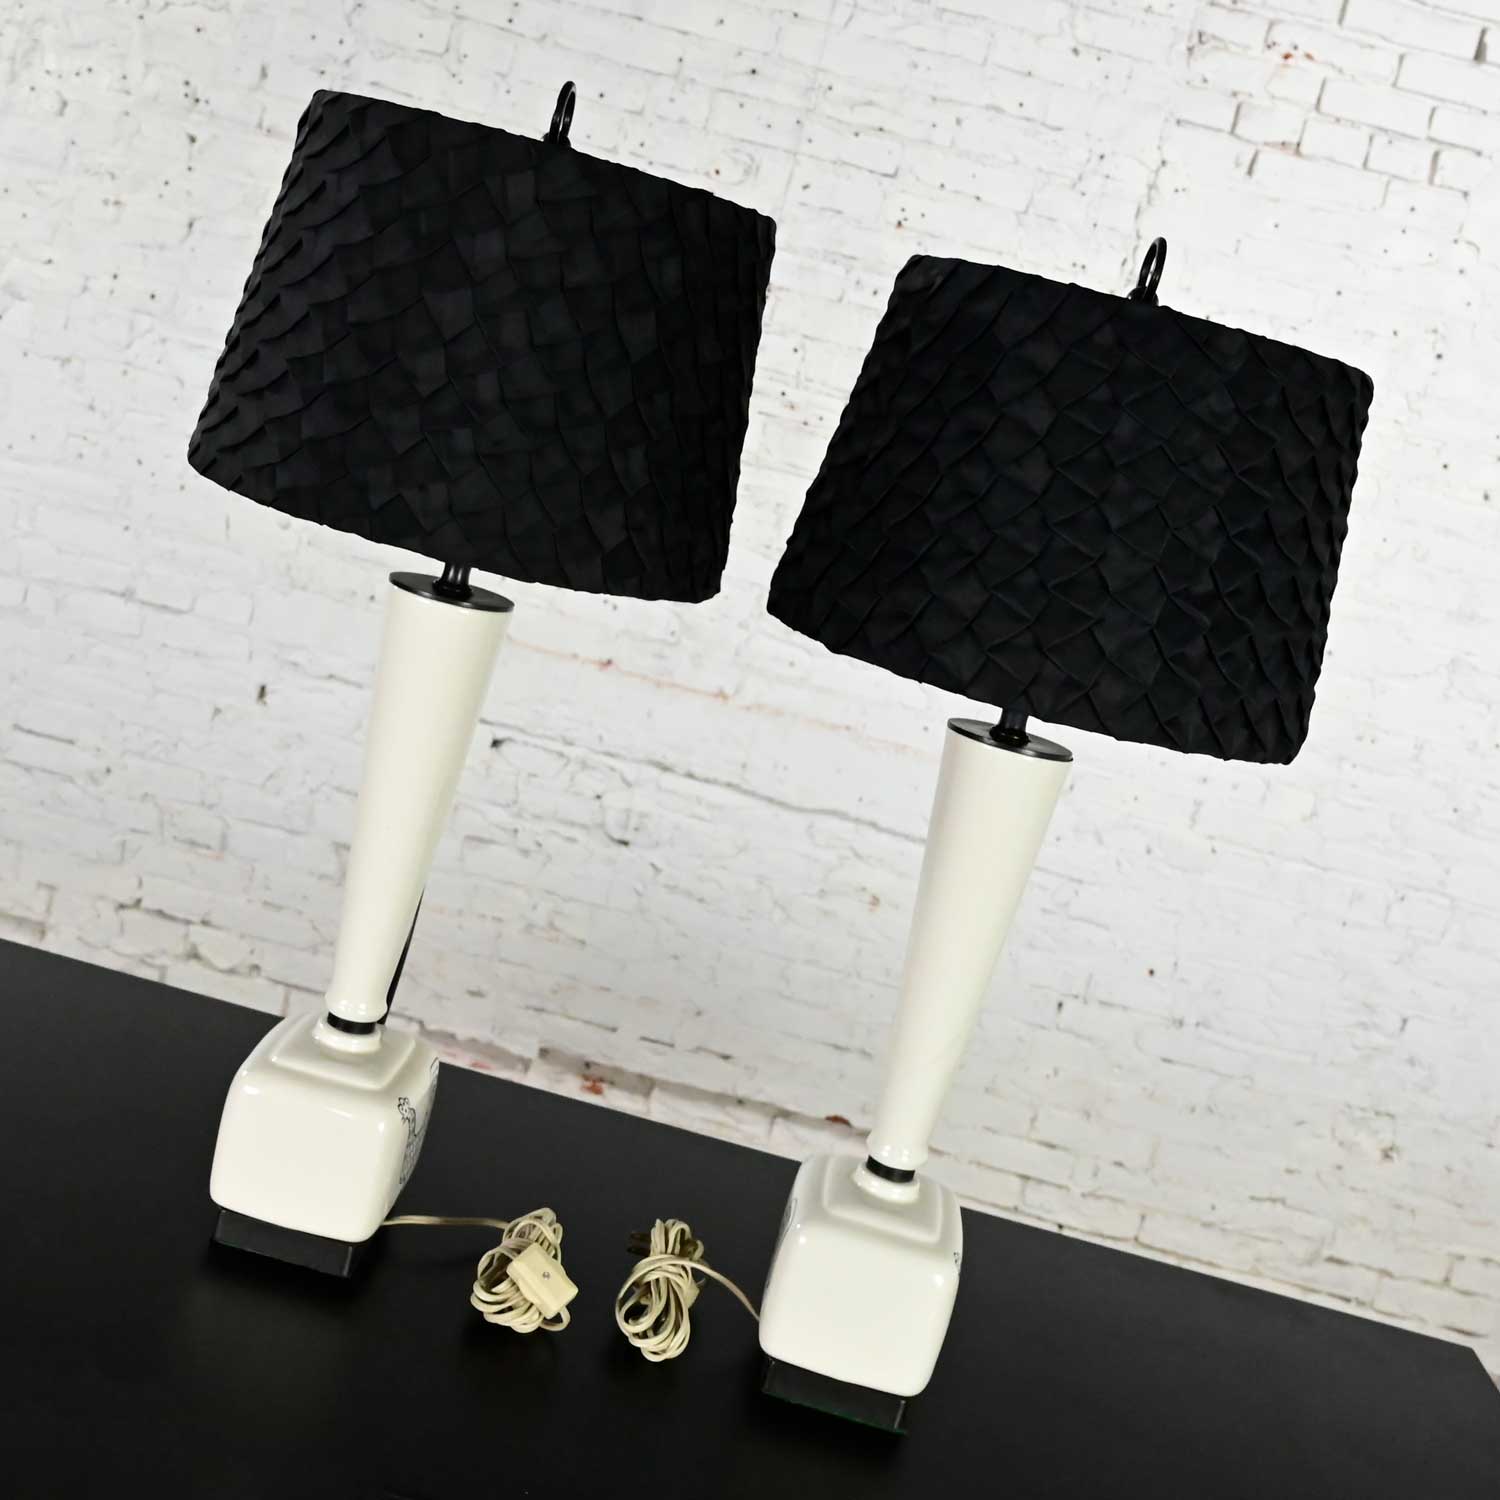 Mid Century Modern Black and White Ceramic Lamps w/ Rooster Design, a Pair